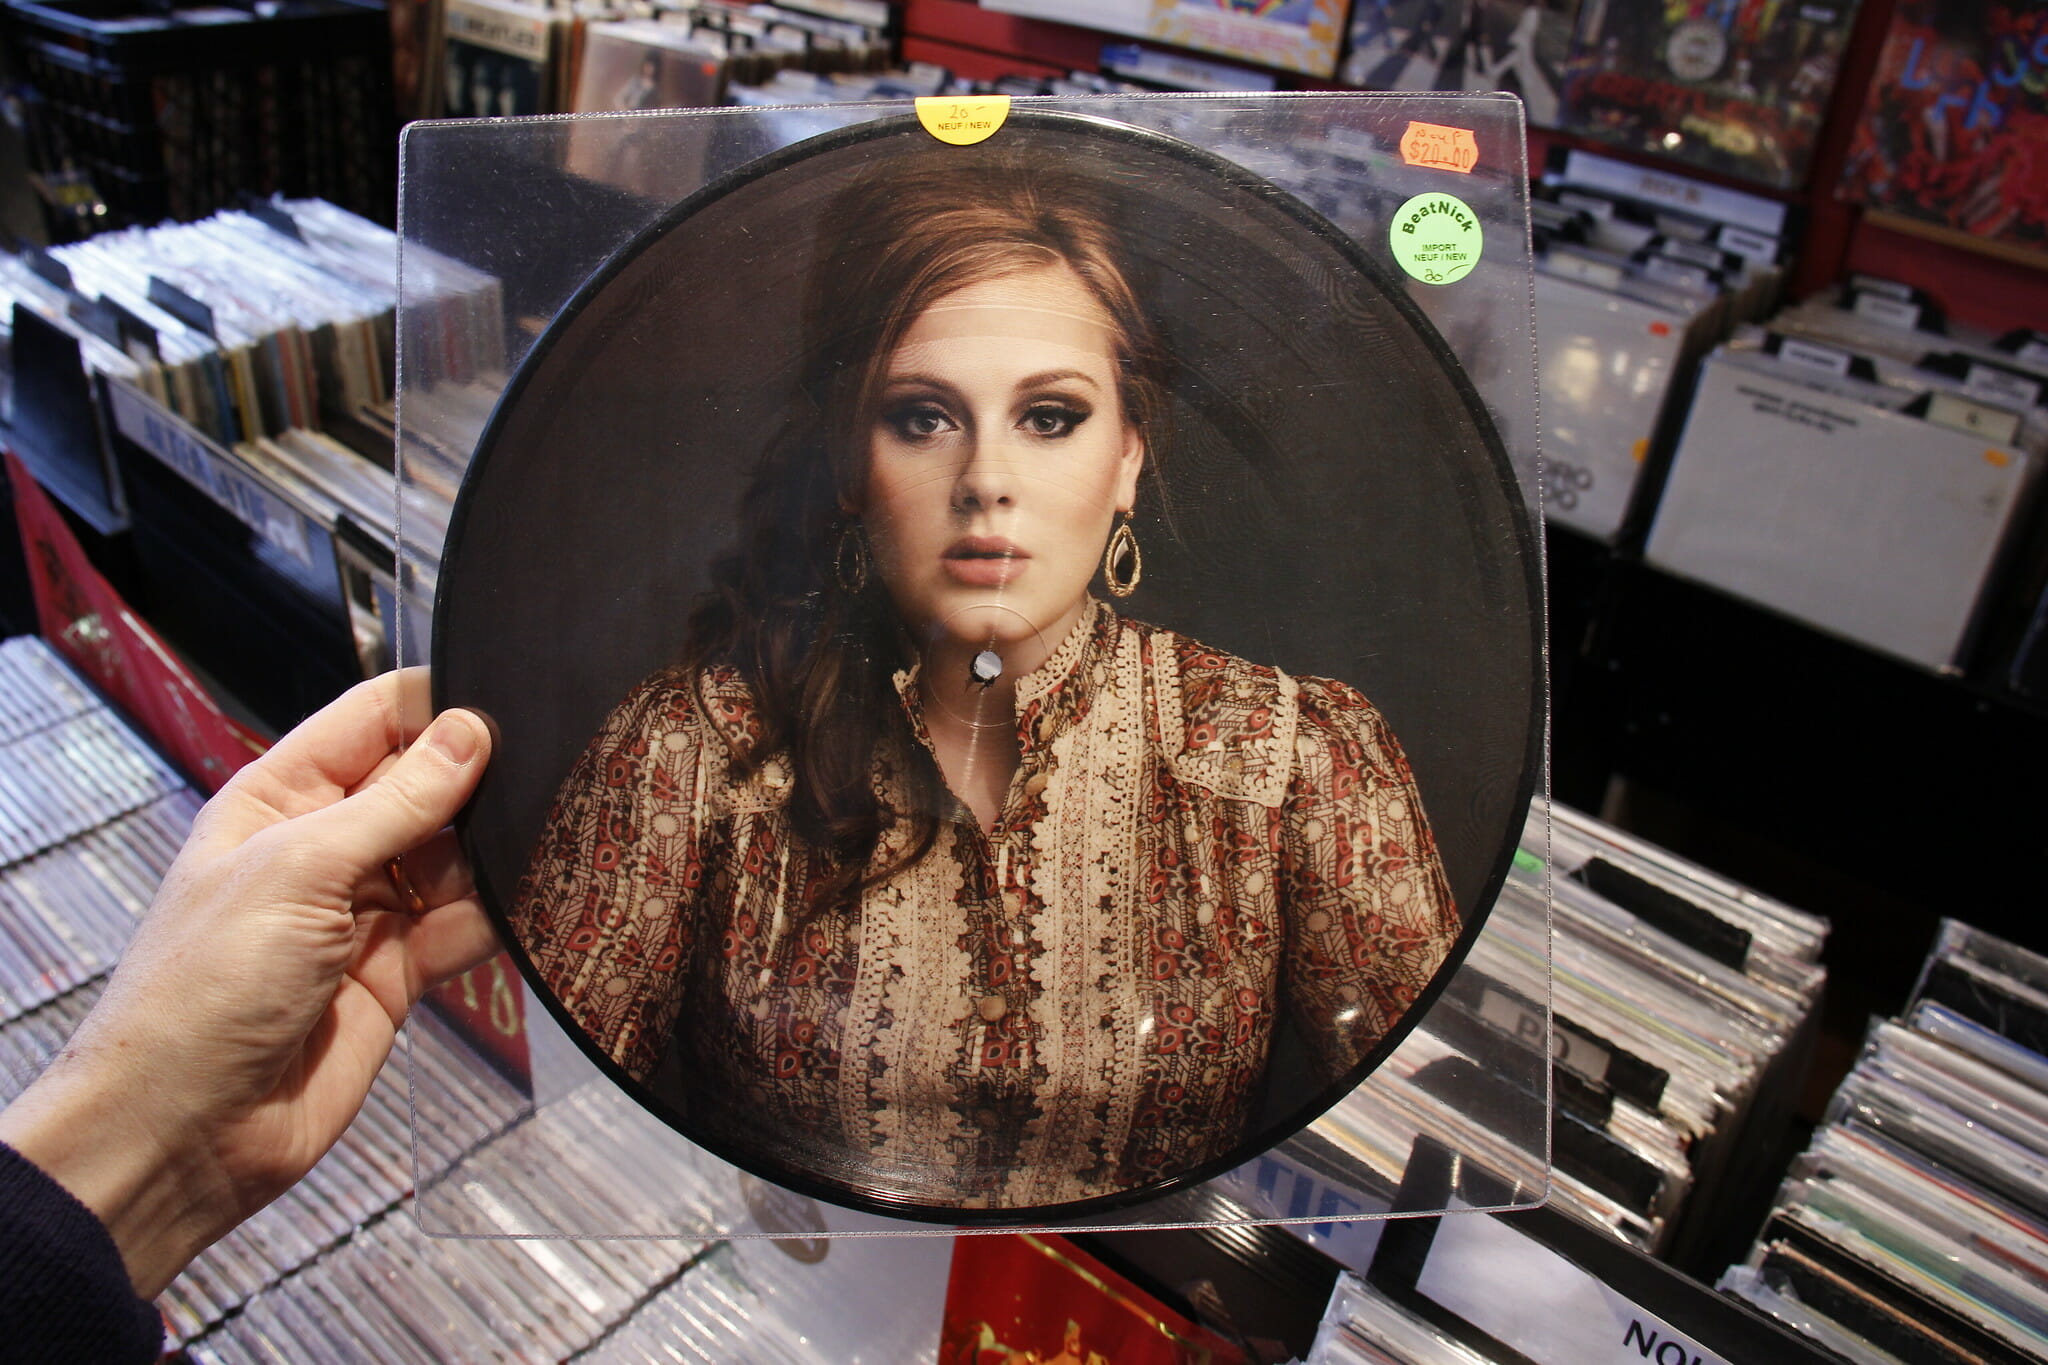 Adele has successfully asked Spotify to remove 'shuffle' from